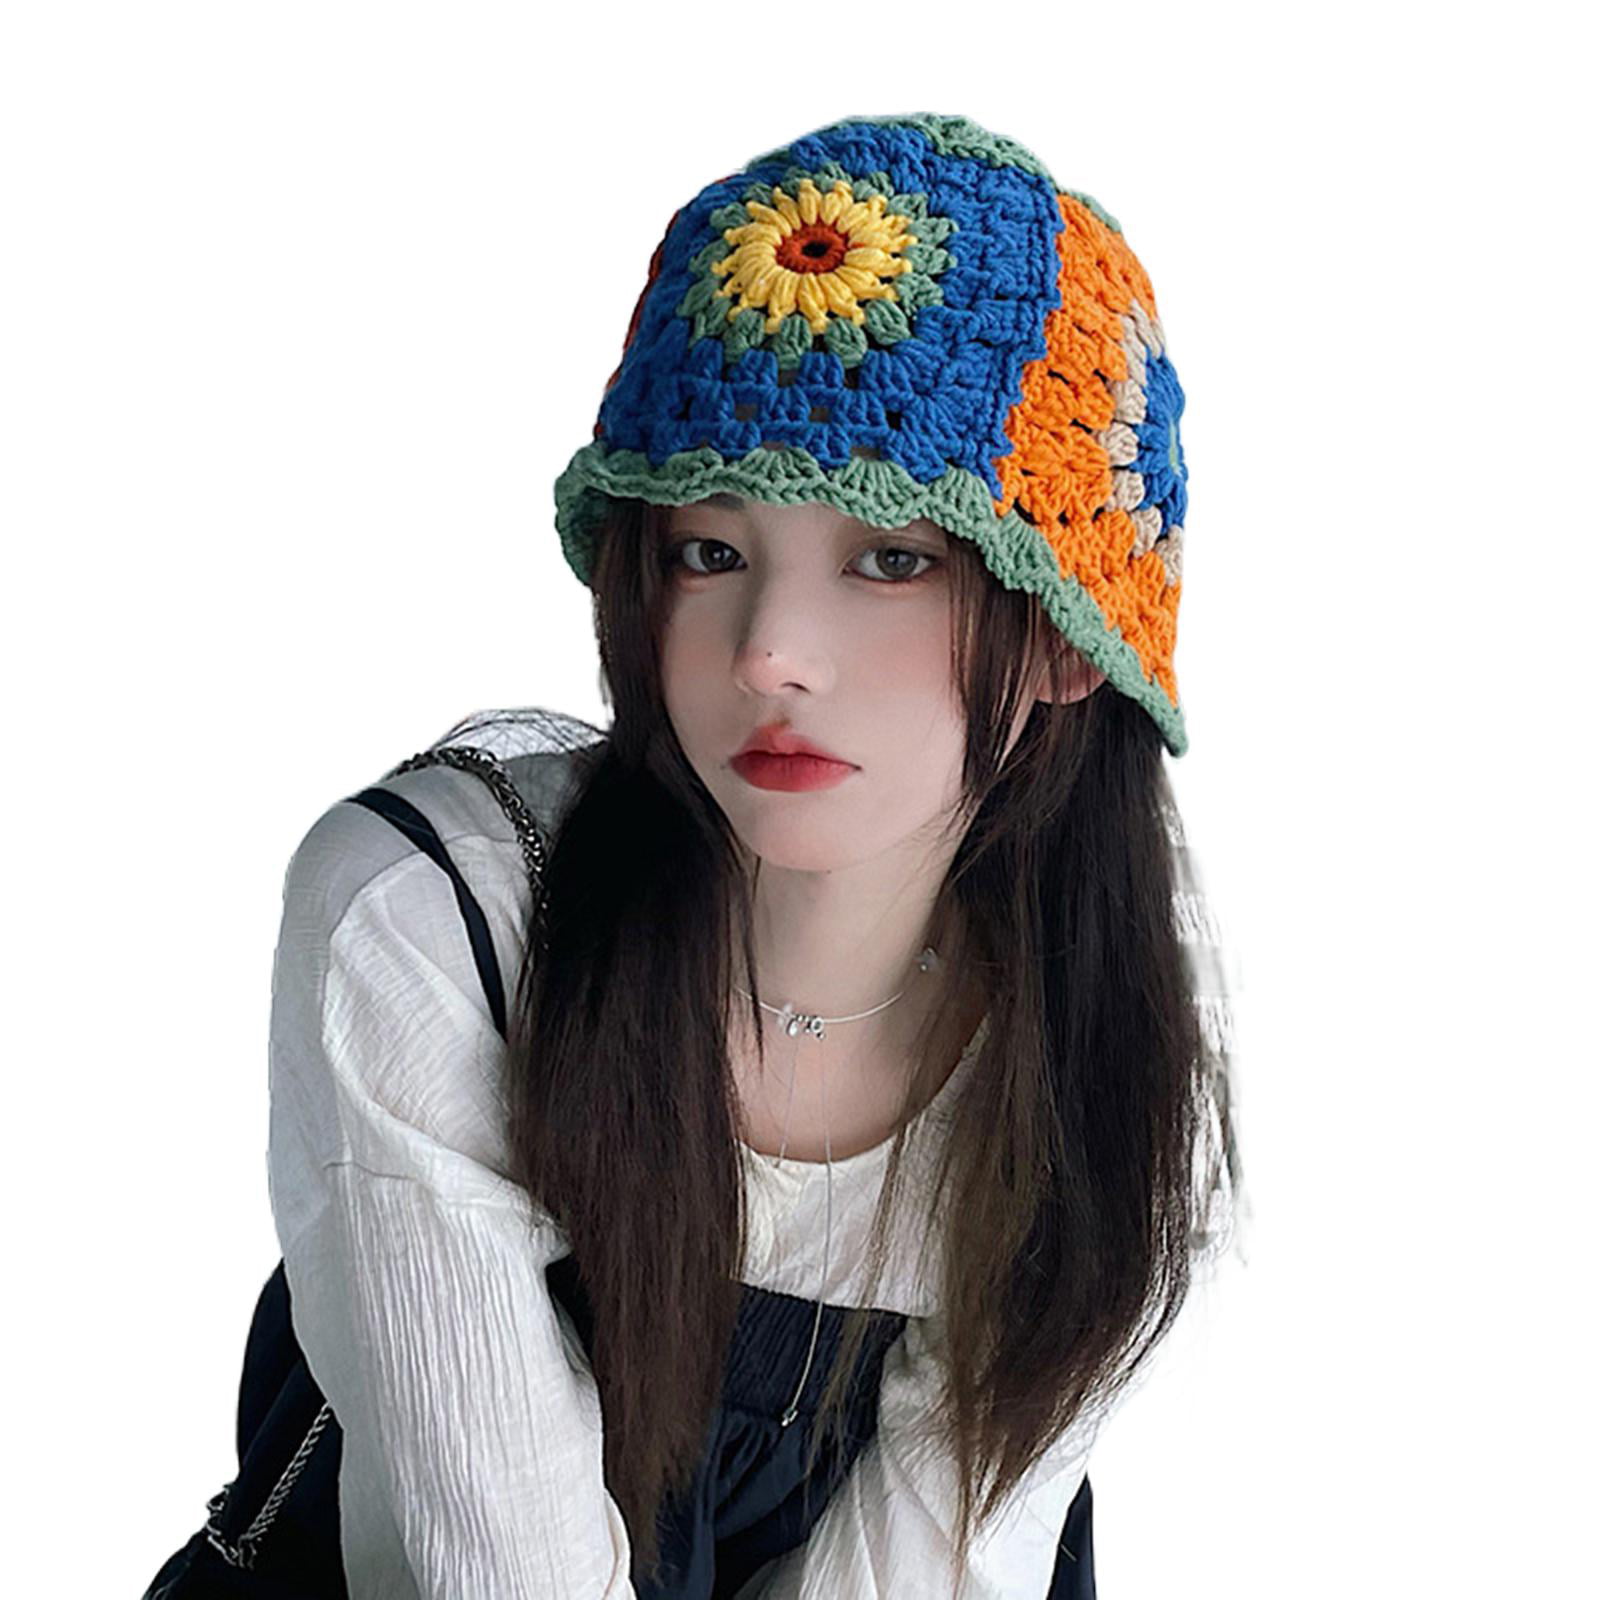 Blotona Women Crochet Bucket Hat Floral Knitted Beanie Hats Hollow Out Sunflower Embroidery Korean Cap Summer Beach Travel Fisherman Hat with Brim for